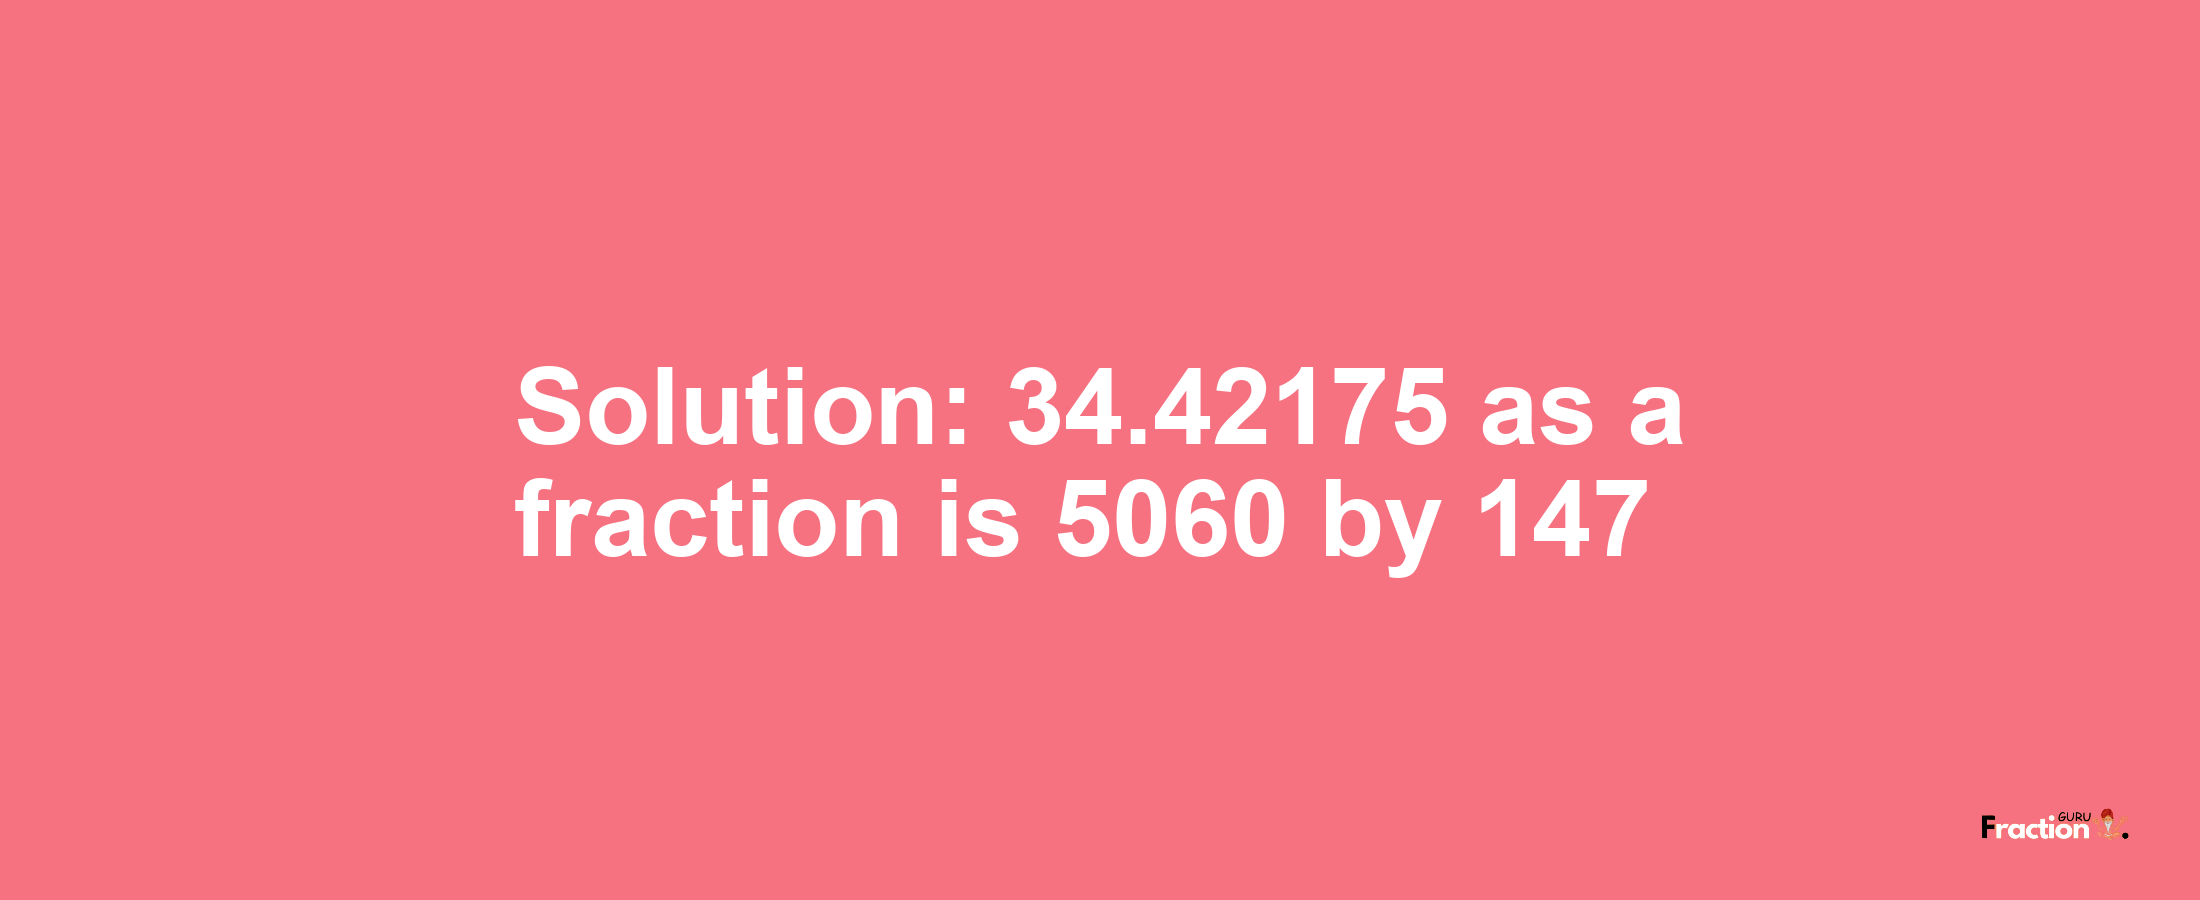 Solution:34.42175 as a fraction is 5060/147